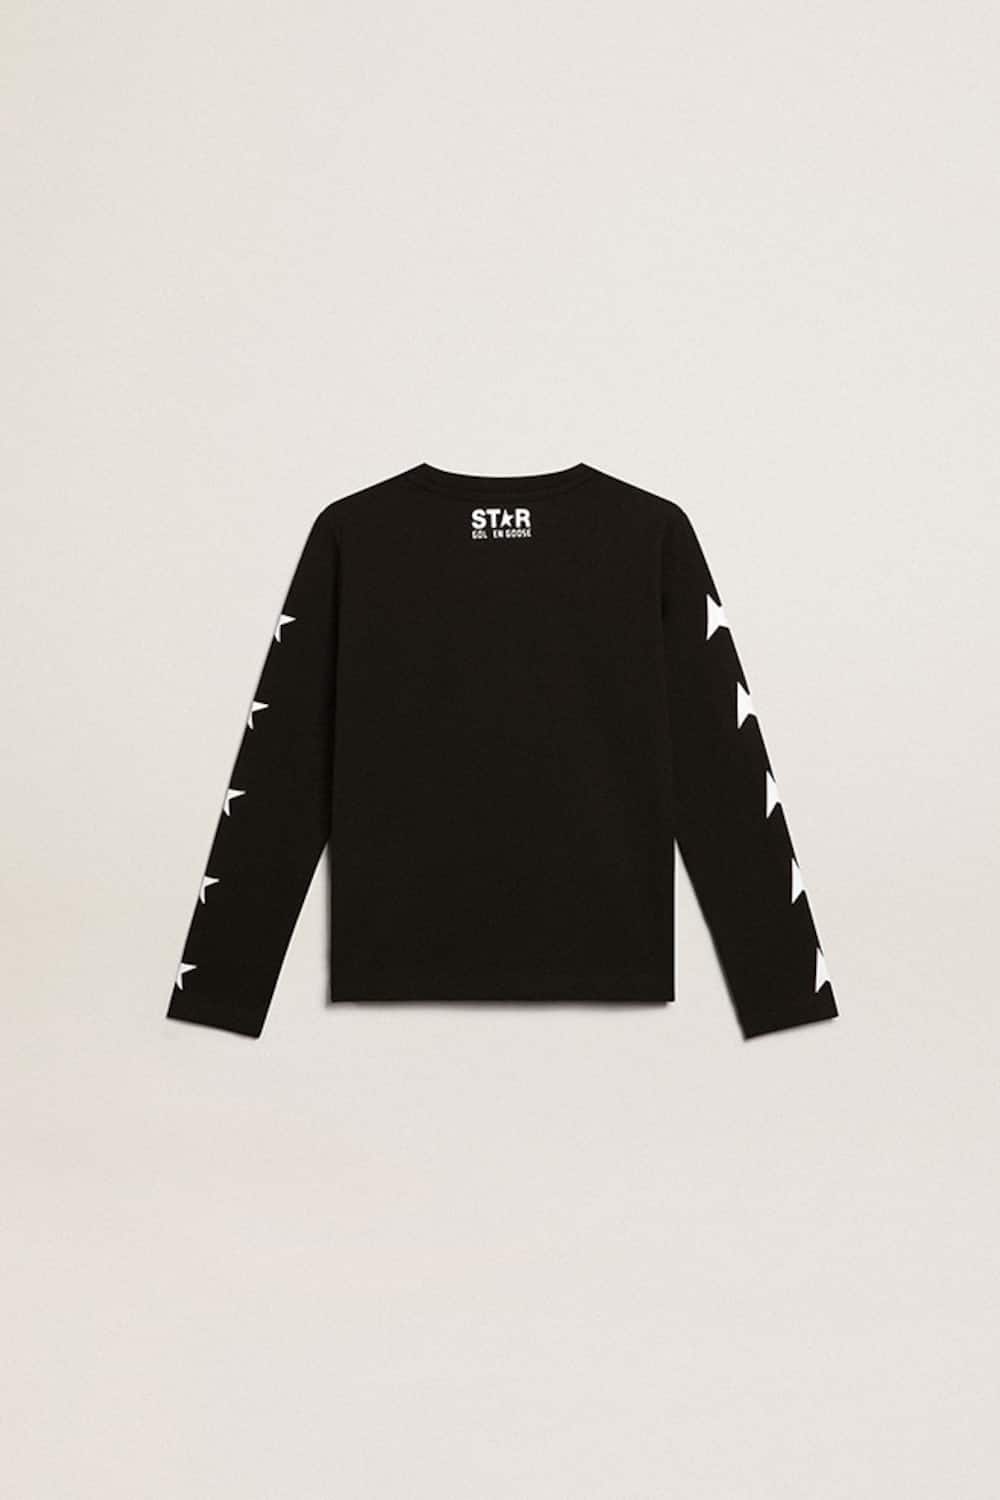 Golden Goose - Boys’ black sweatshirt with contrasting white stars in 